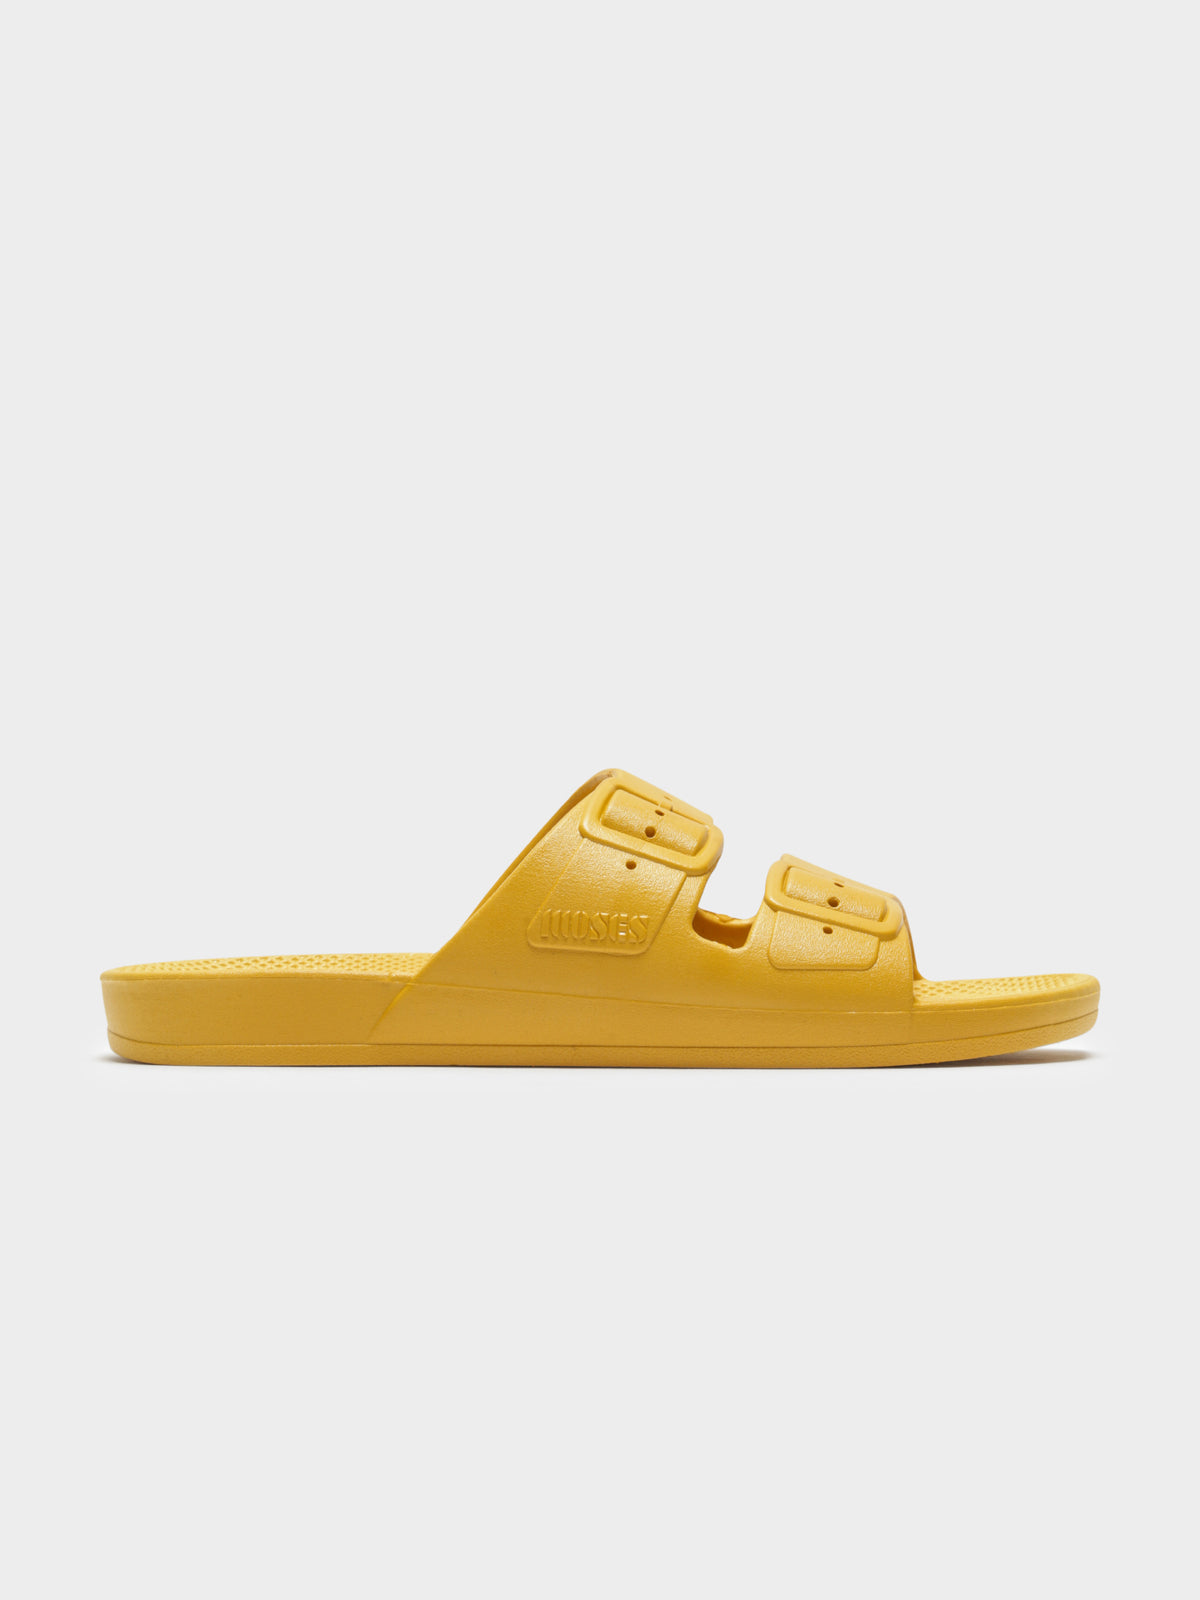 Unisex Freedom Moses Slides in Mustard